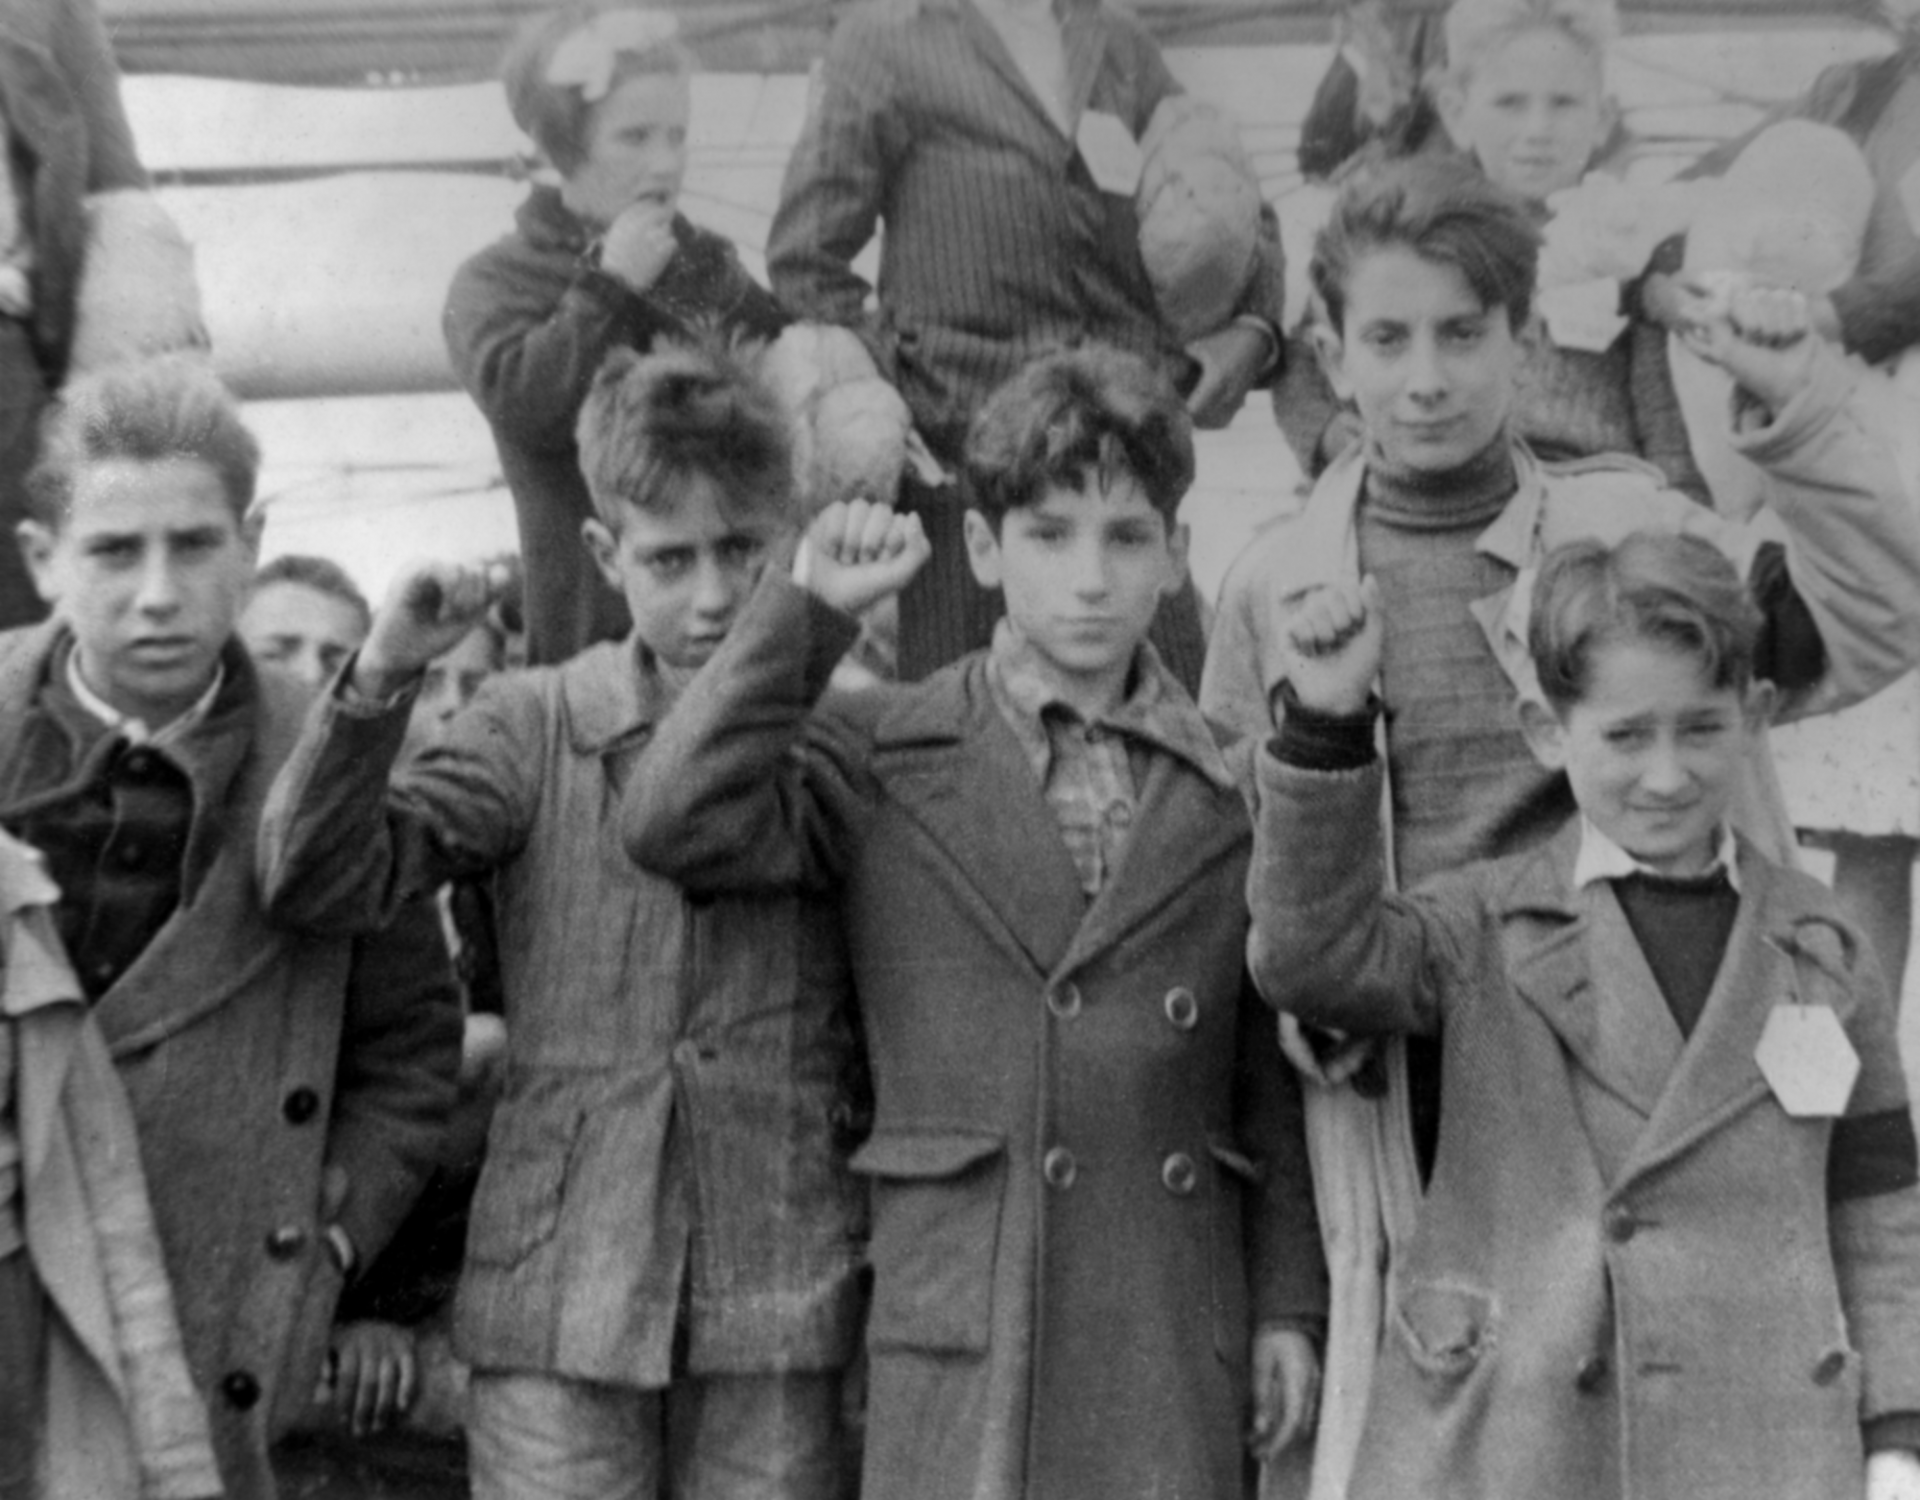 Children preparing for evacuation from Spain, during the Spanish Civil War, some giving the Republican salute. Source: Wikimedia Commons, CC BY-SA 3.0.